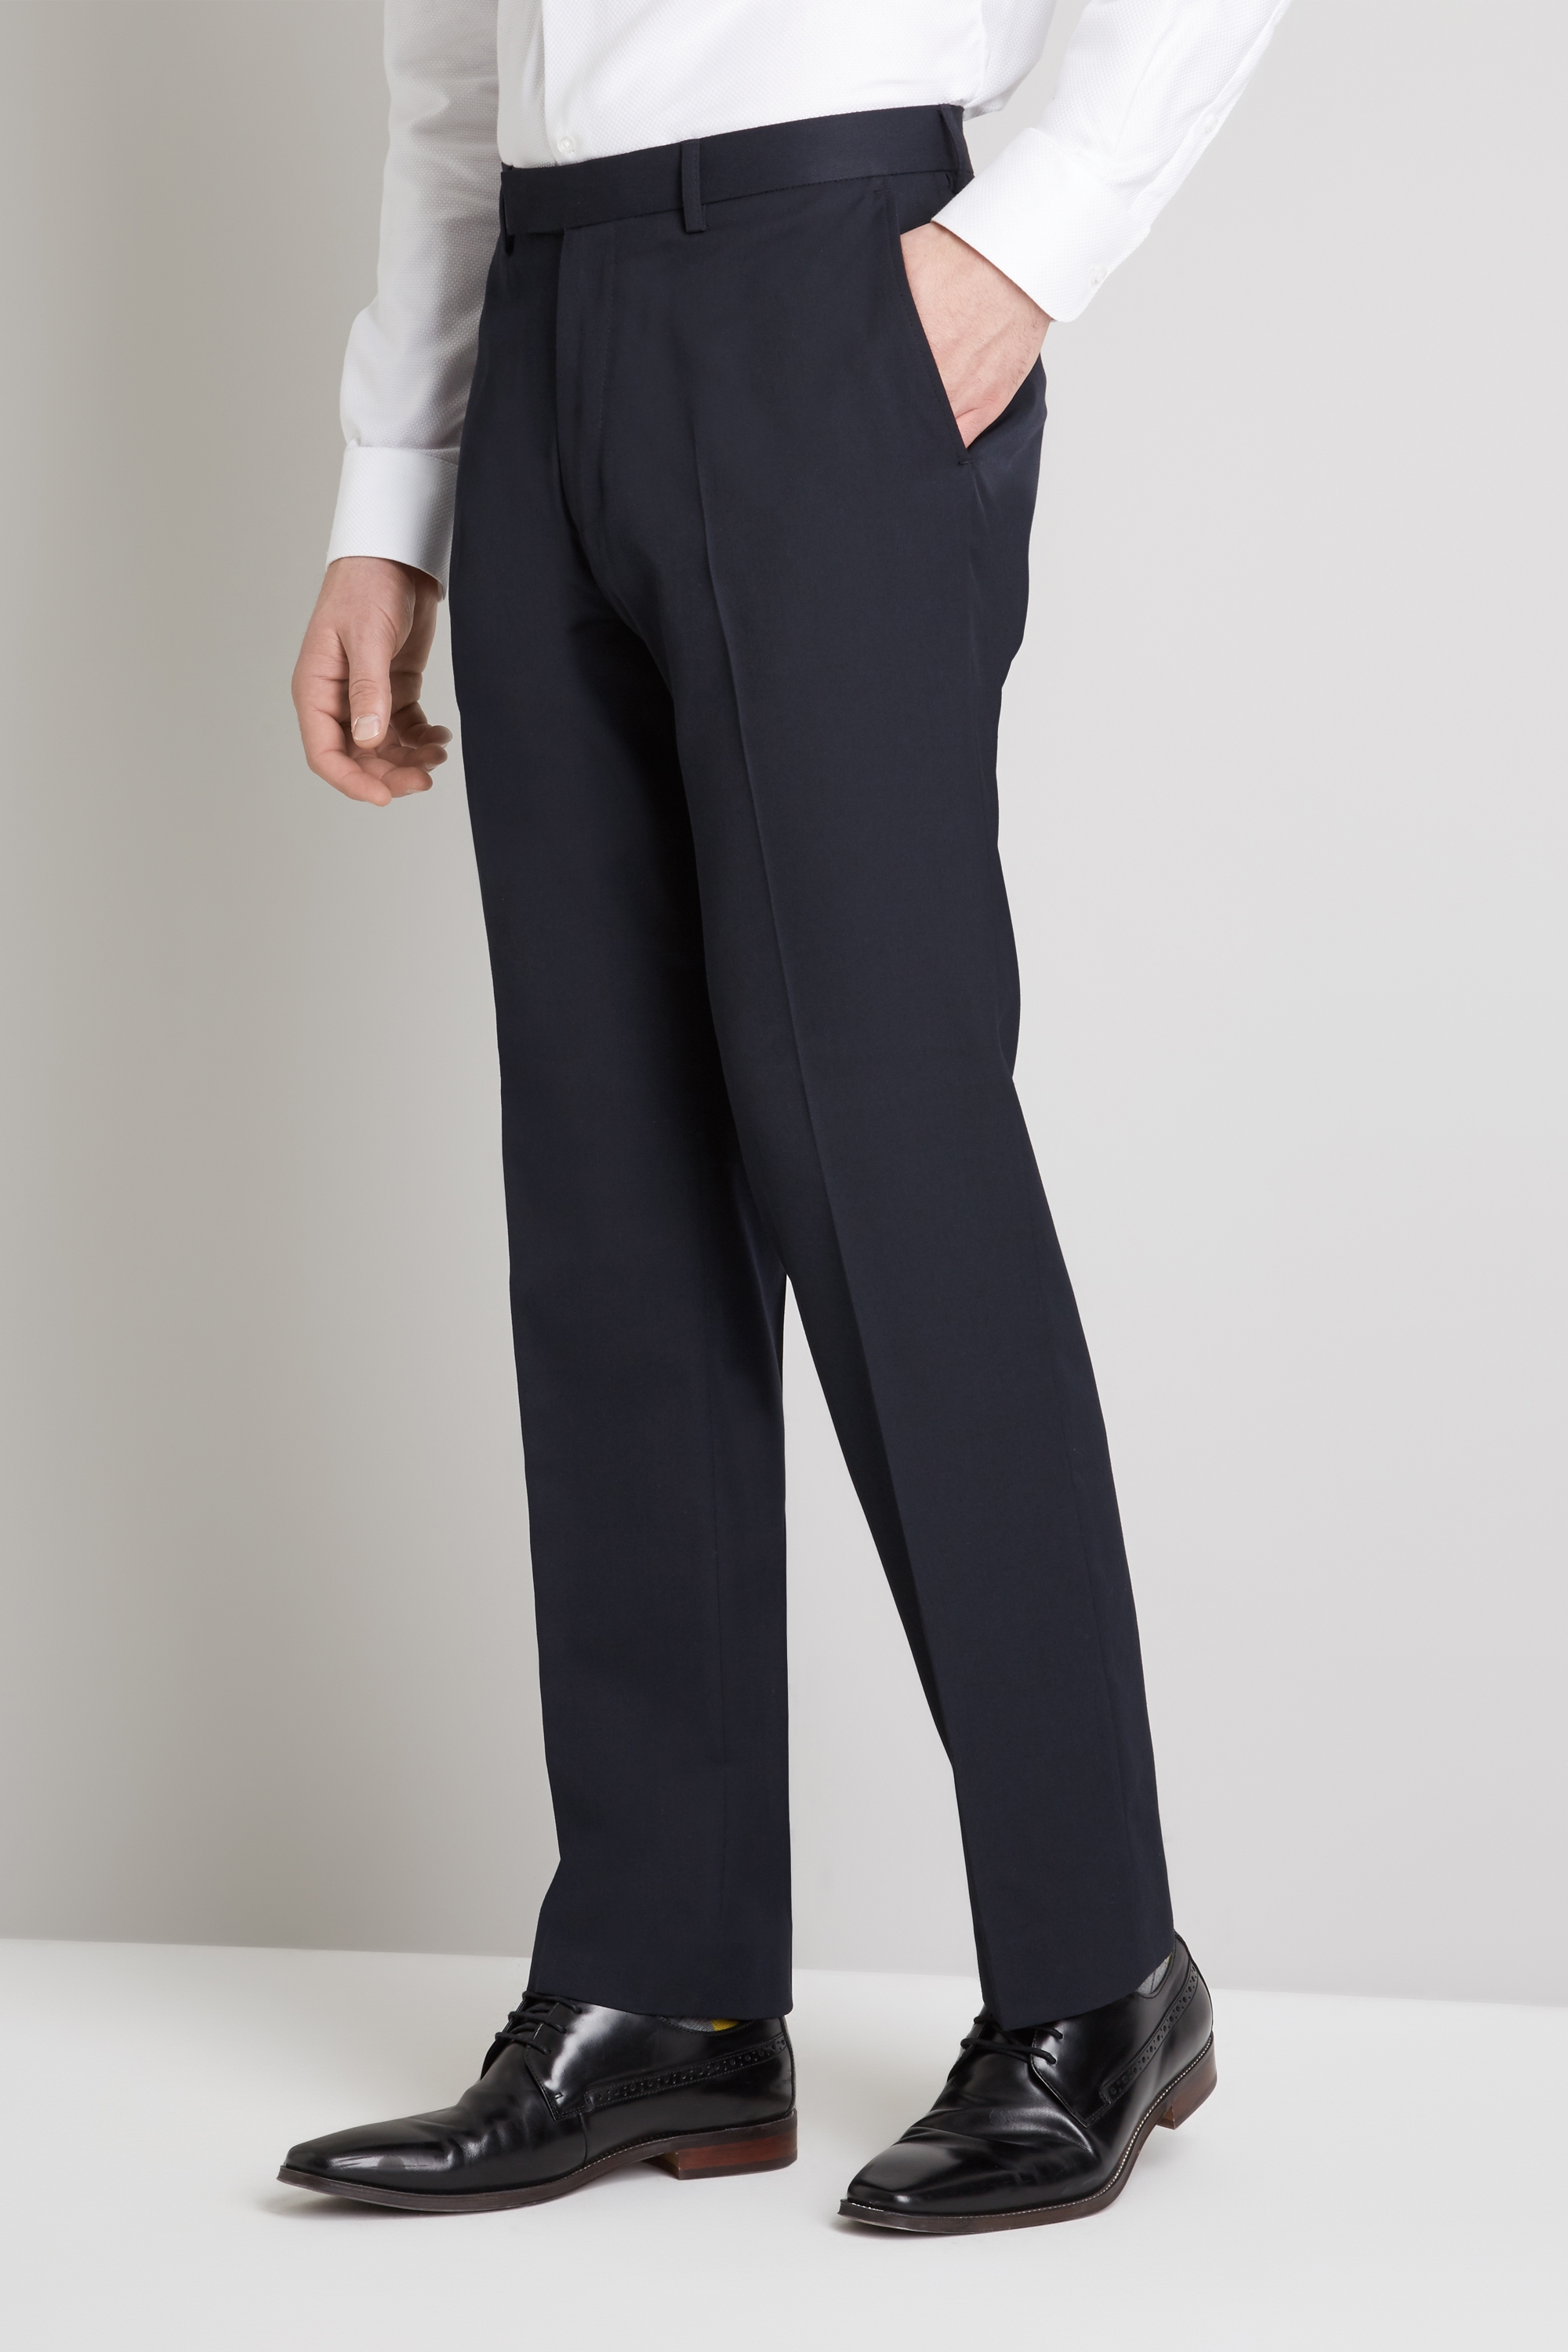 Moss Esq. Regular Fit Machine Washable Navy Trousers | Buy Online at Moss